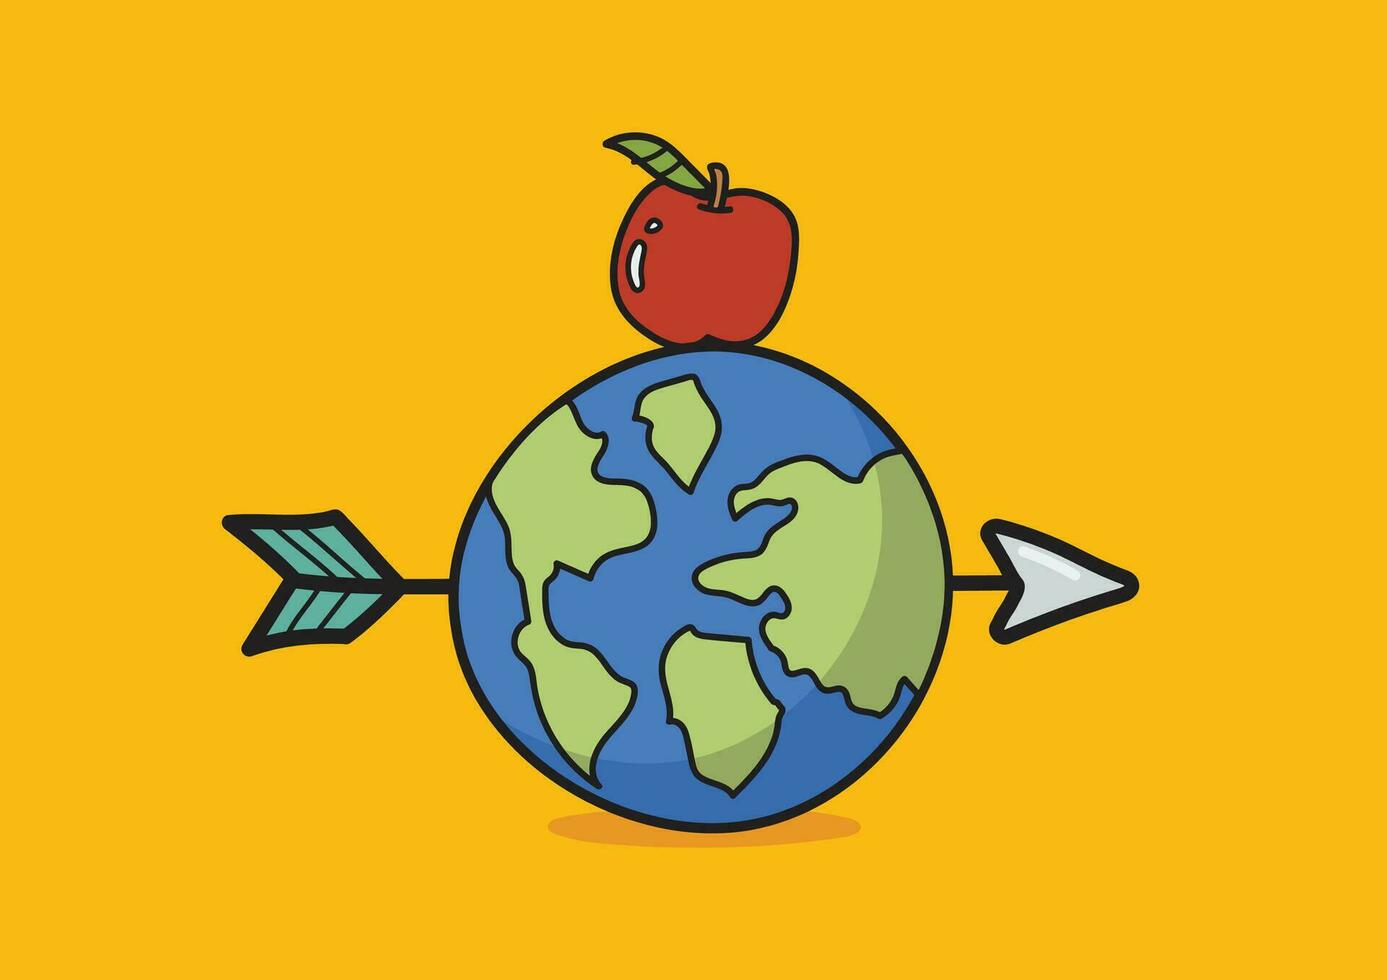 Earth was shot by arrow with apple on top doodle style vector